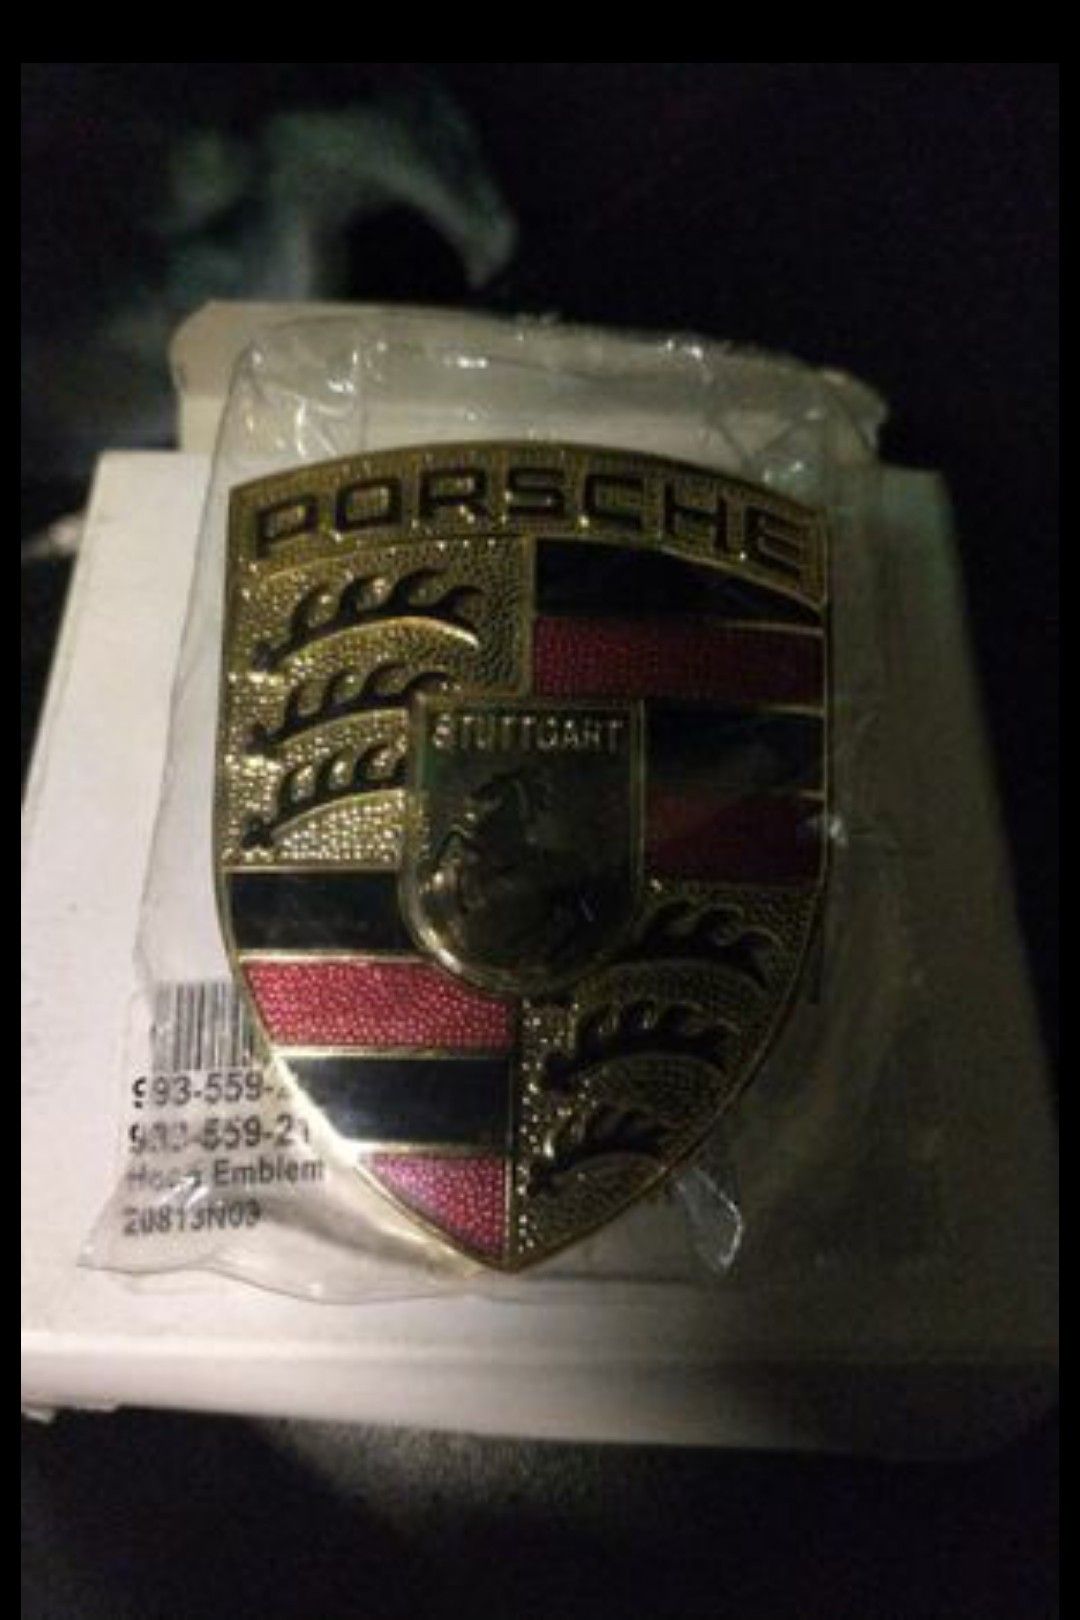 Original PORSCHE 911 Hood Crest OEM--Brand New in Box and plastic wrapped 911 930 964 993